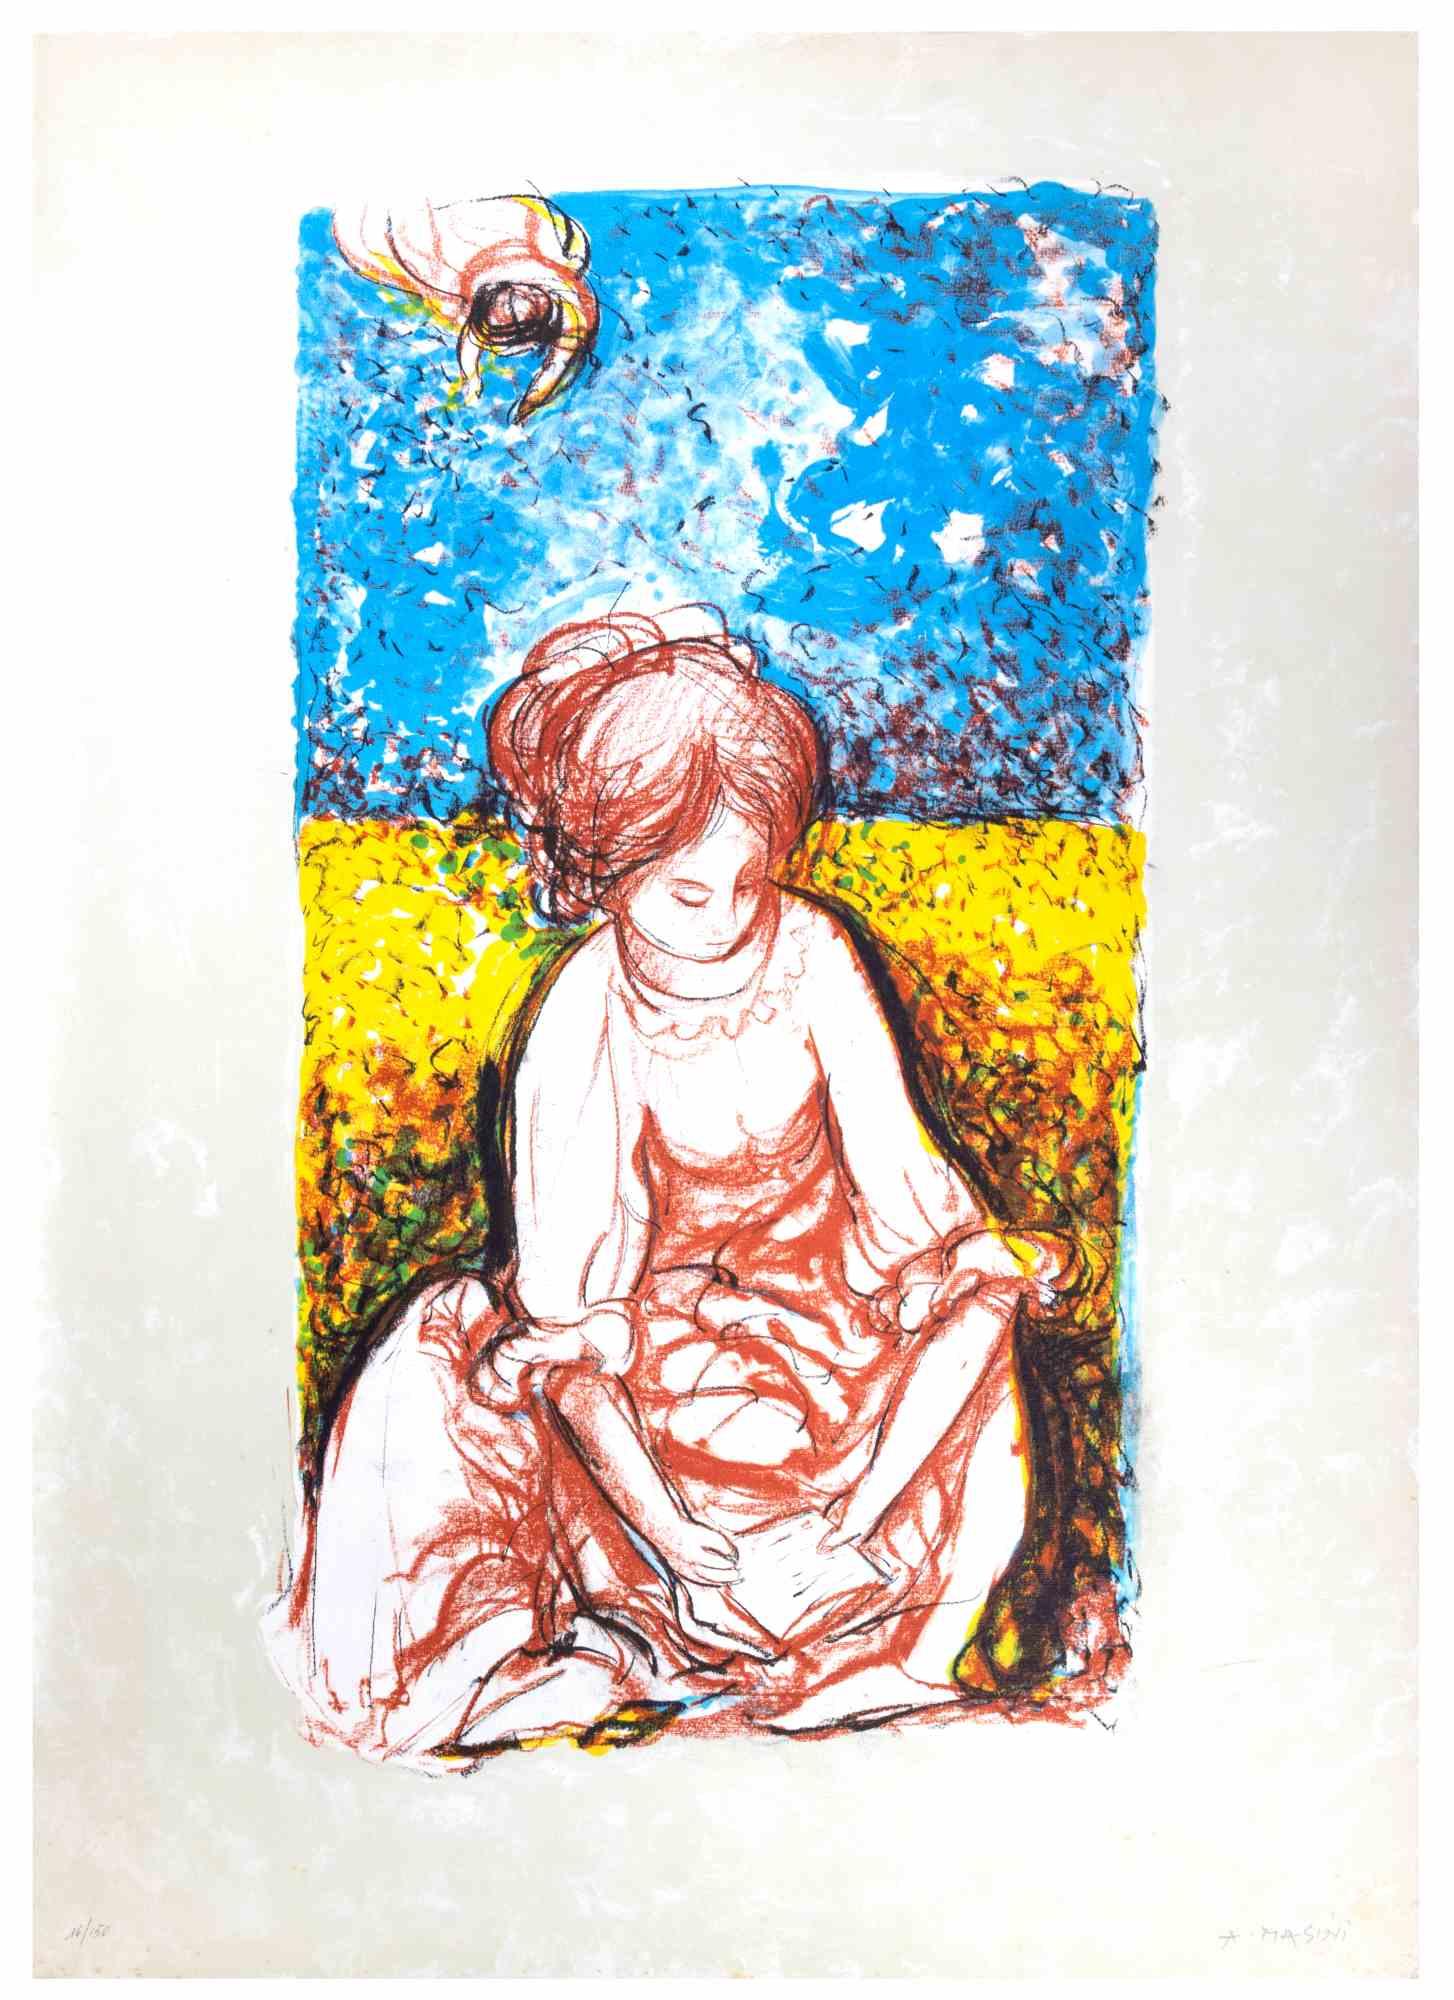 Reading Girl in Wheat Field is a lithograph print realized by Antonio Masini in the 1970s.

Hand-signed in pencil on the lower right. Numbered on the lower left, an edition of 150 prints.

Good conditions with slight foxing.

A colorful dreamy scene